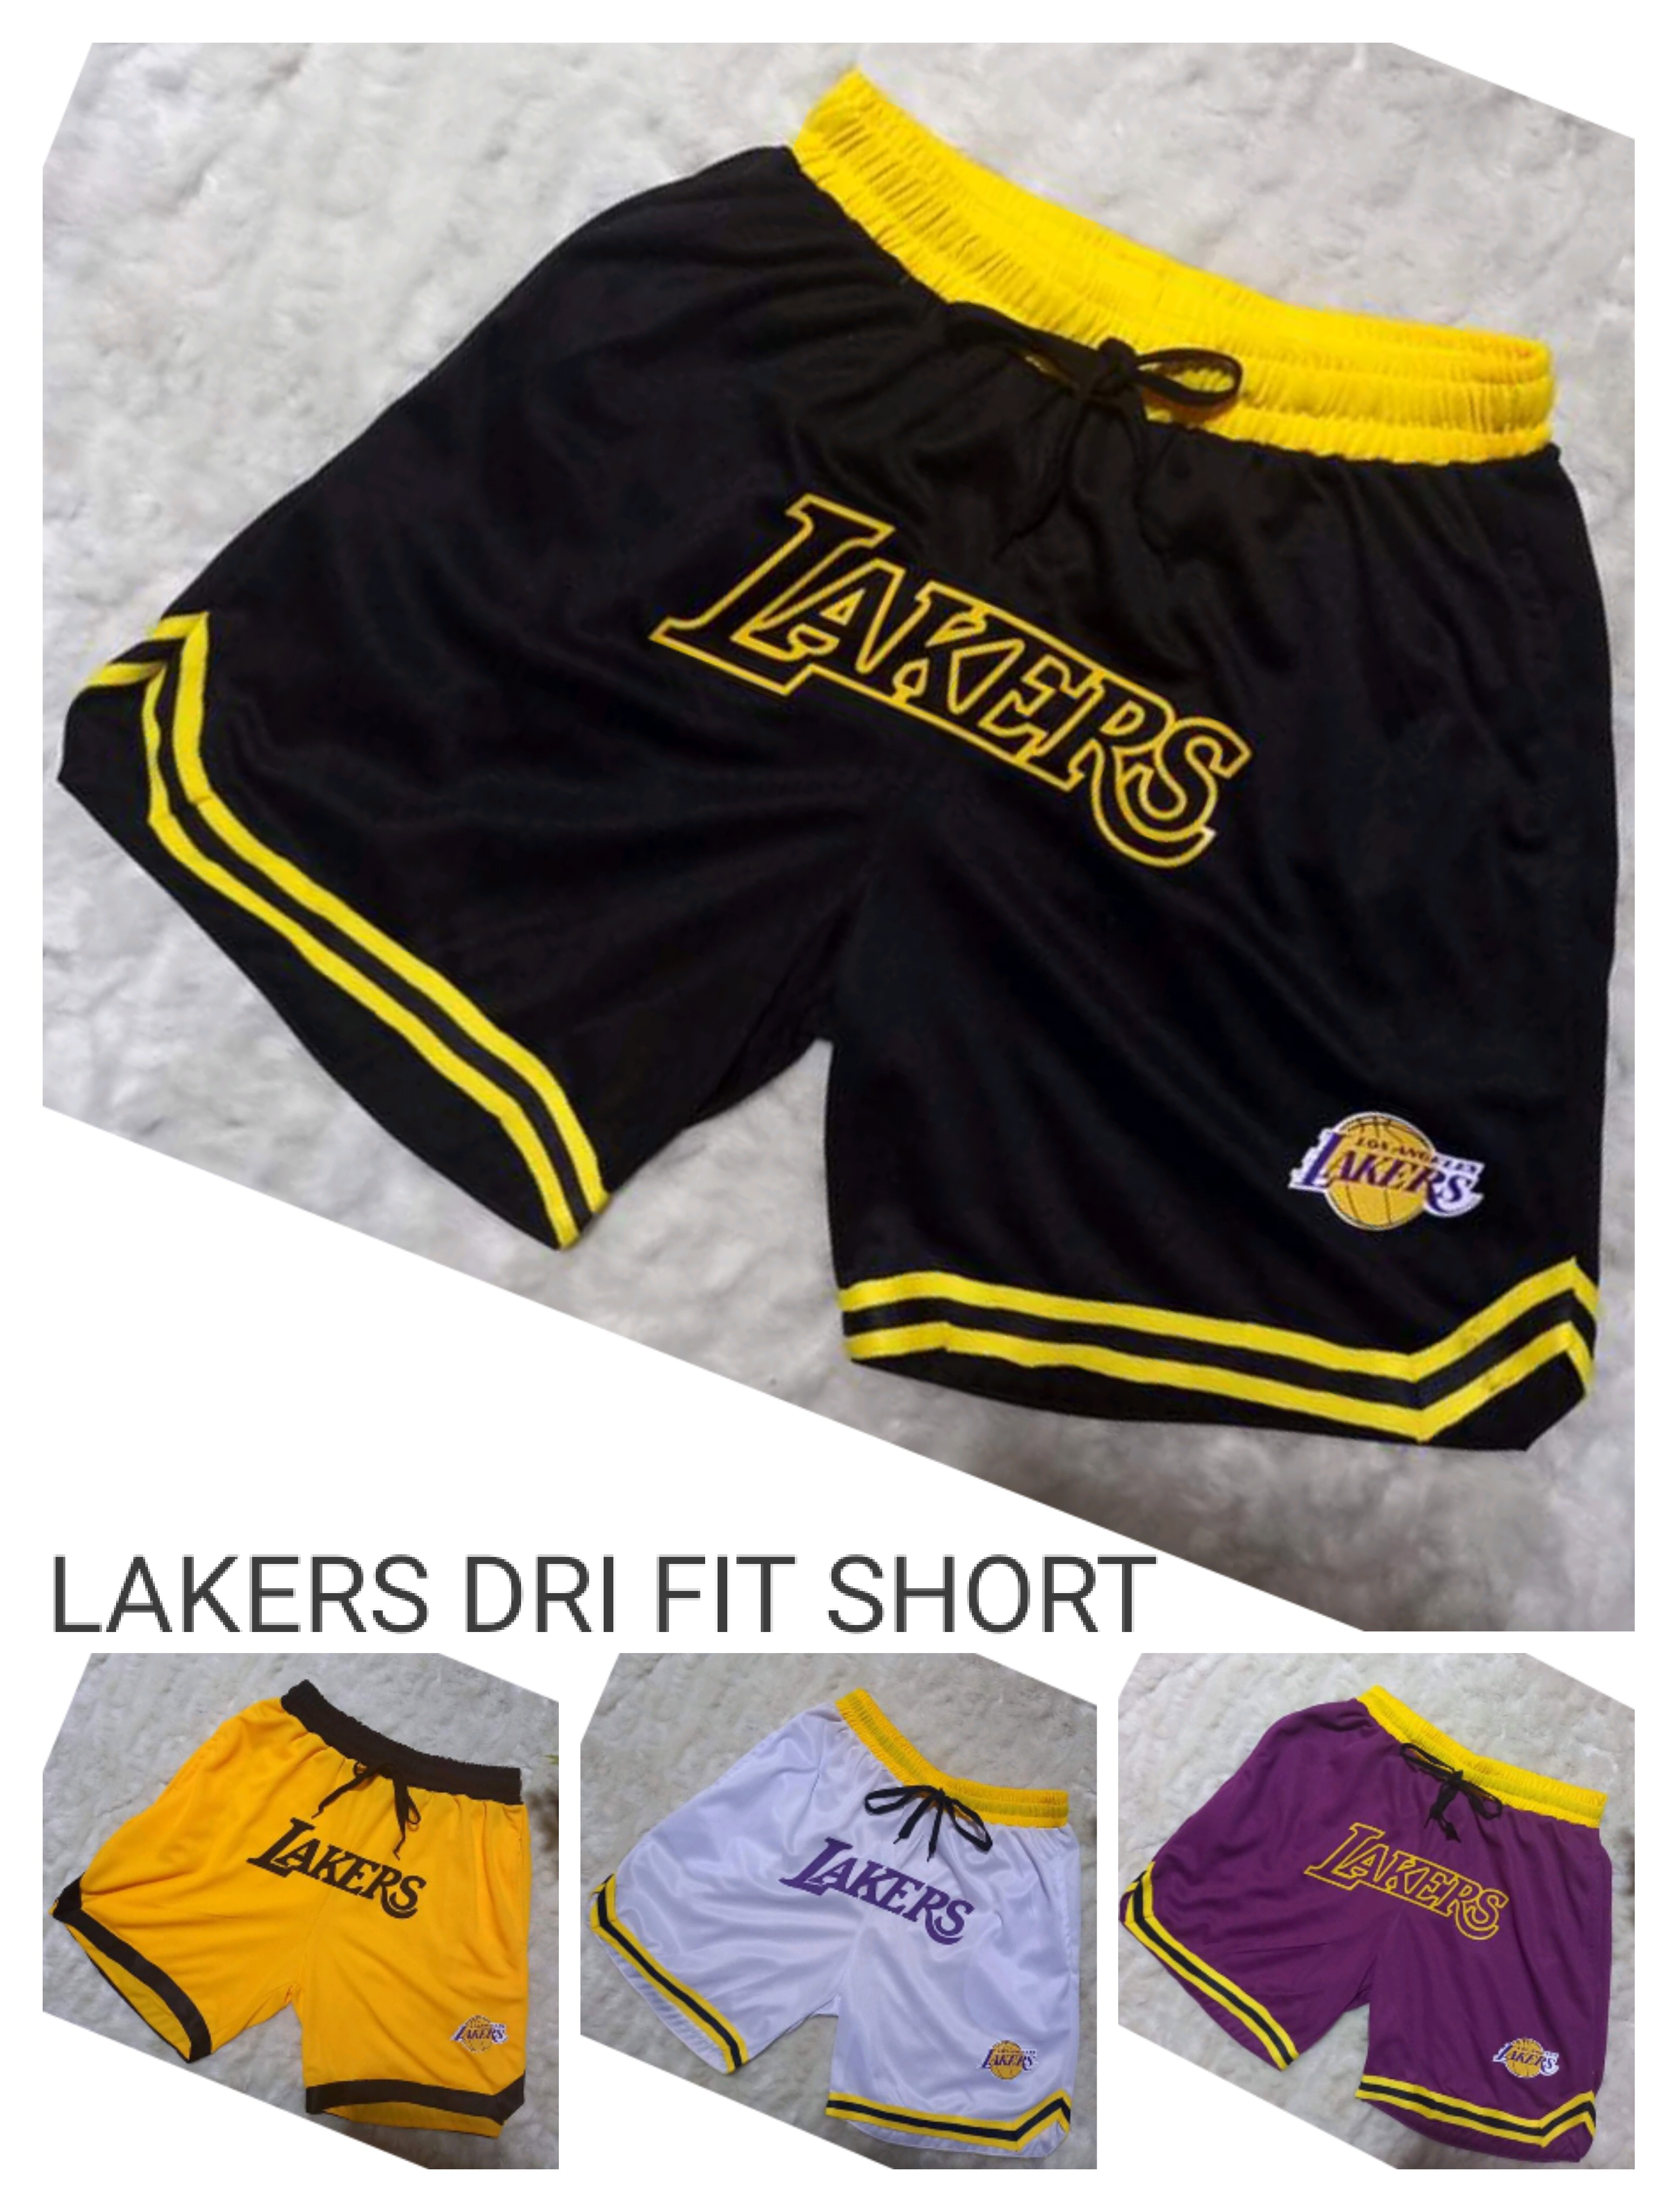 COTTON ON LAKERS SHORTS, Men's Fashion, Bottoms, Shorts on Carousell